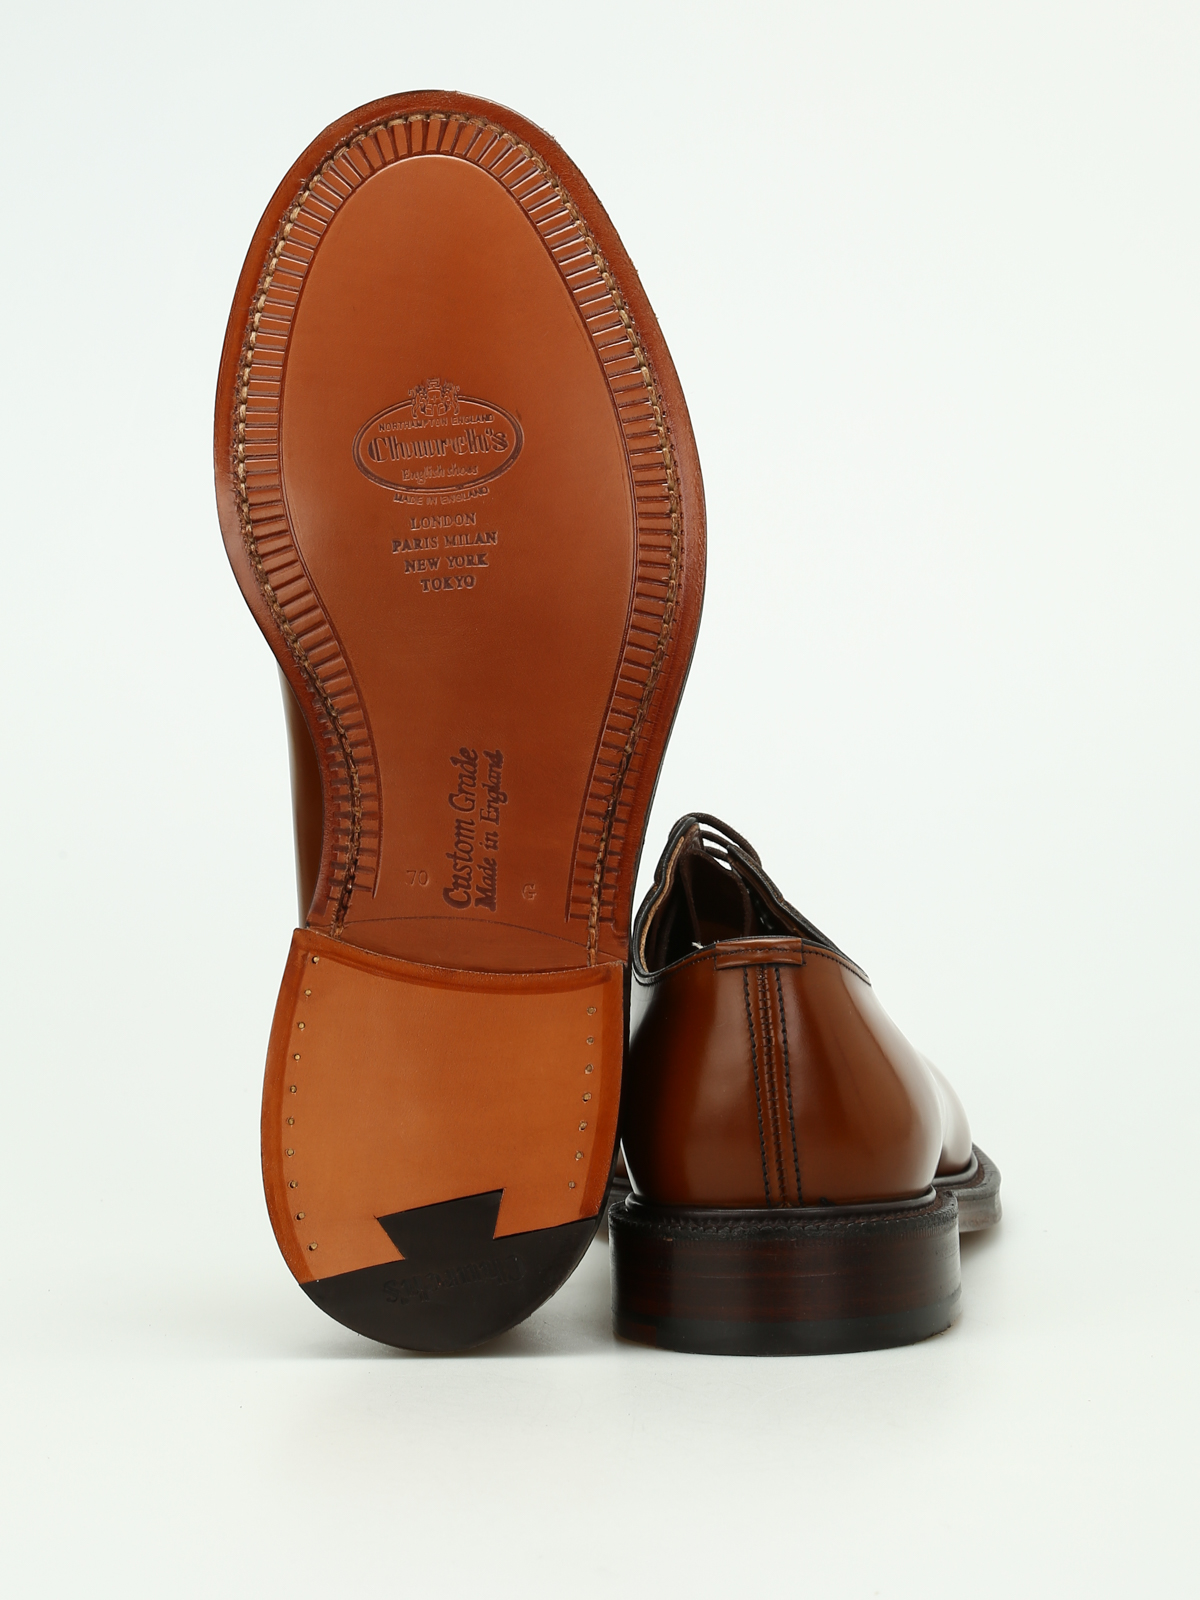 Classic shoes Church's - Shannon polished binder shoes ...